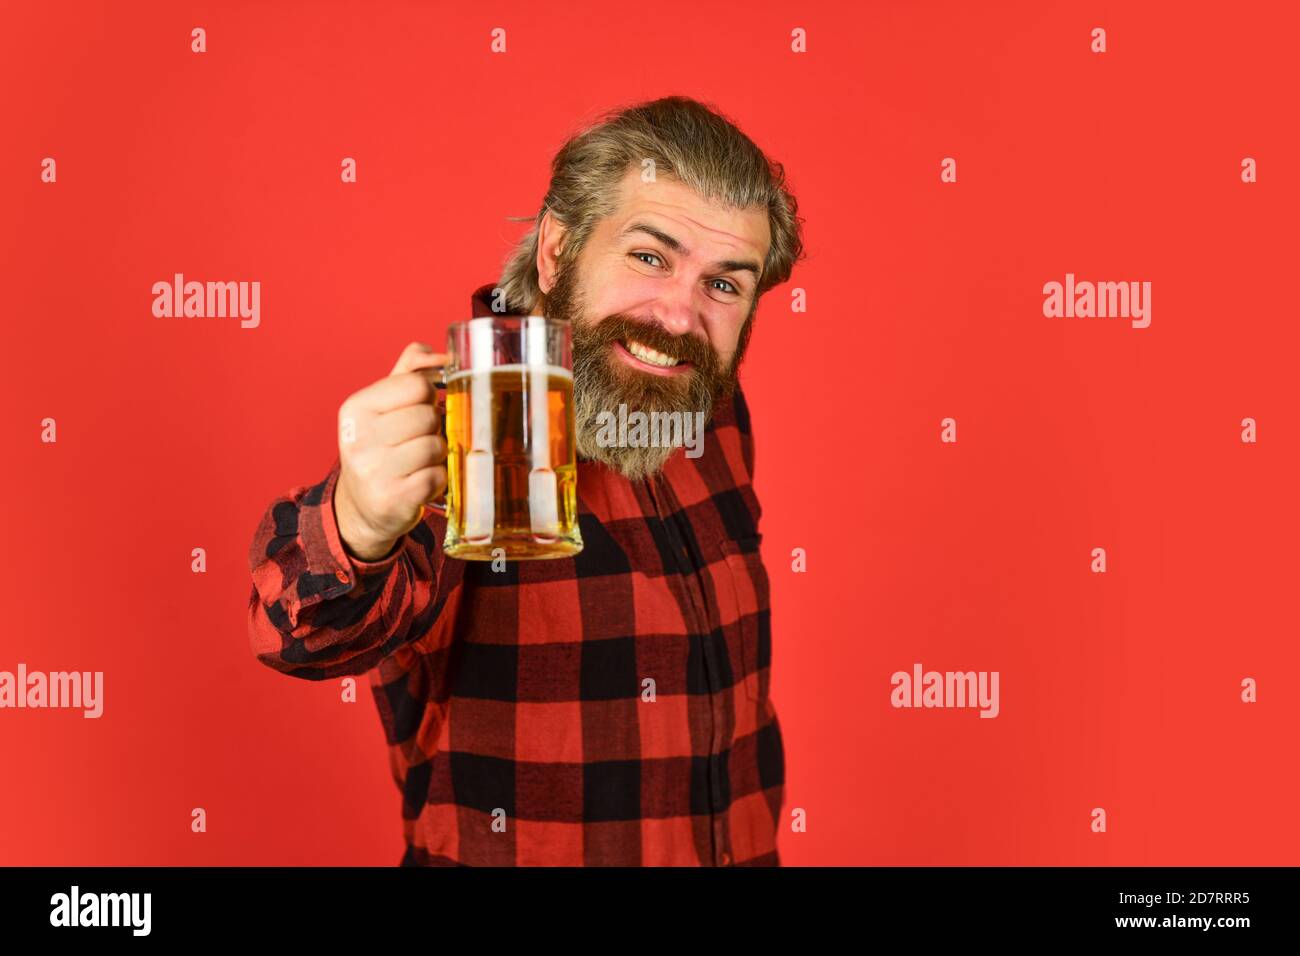 Beer festival. recreation. Man hold glass of beer. hipster at bar counter. having fun watching football. Brutal bearded male drinks beer from glass. Beer pub. Stylish bartender or barman in bar. Stock Photo